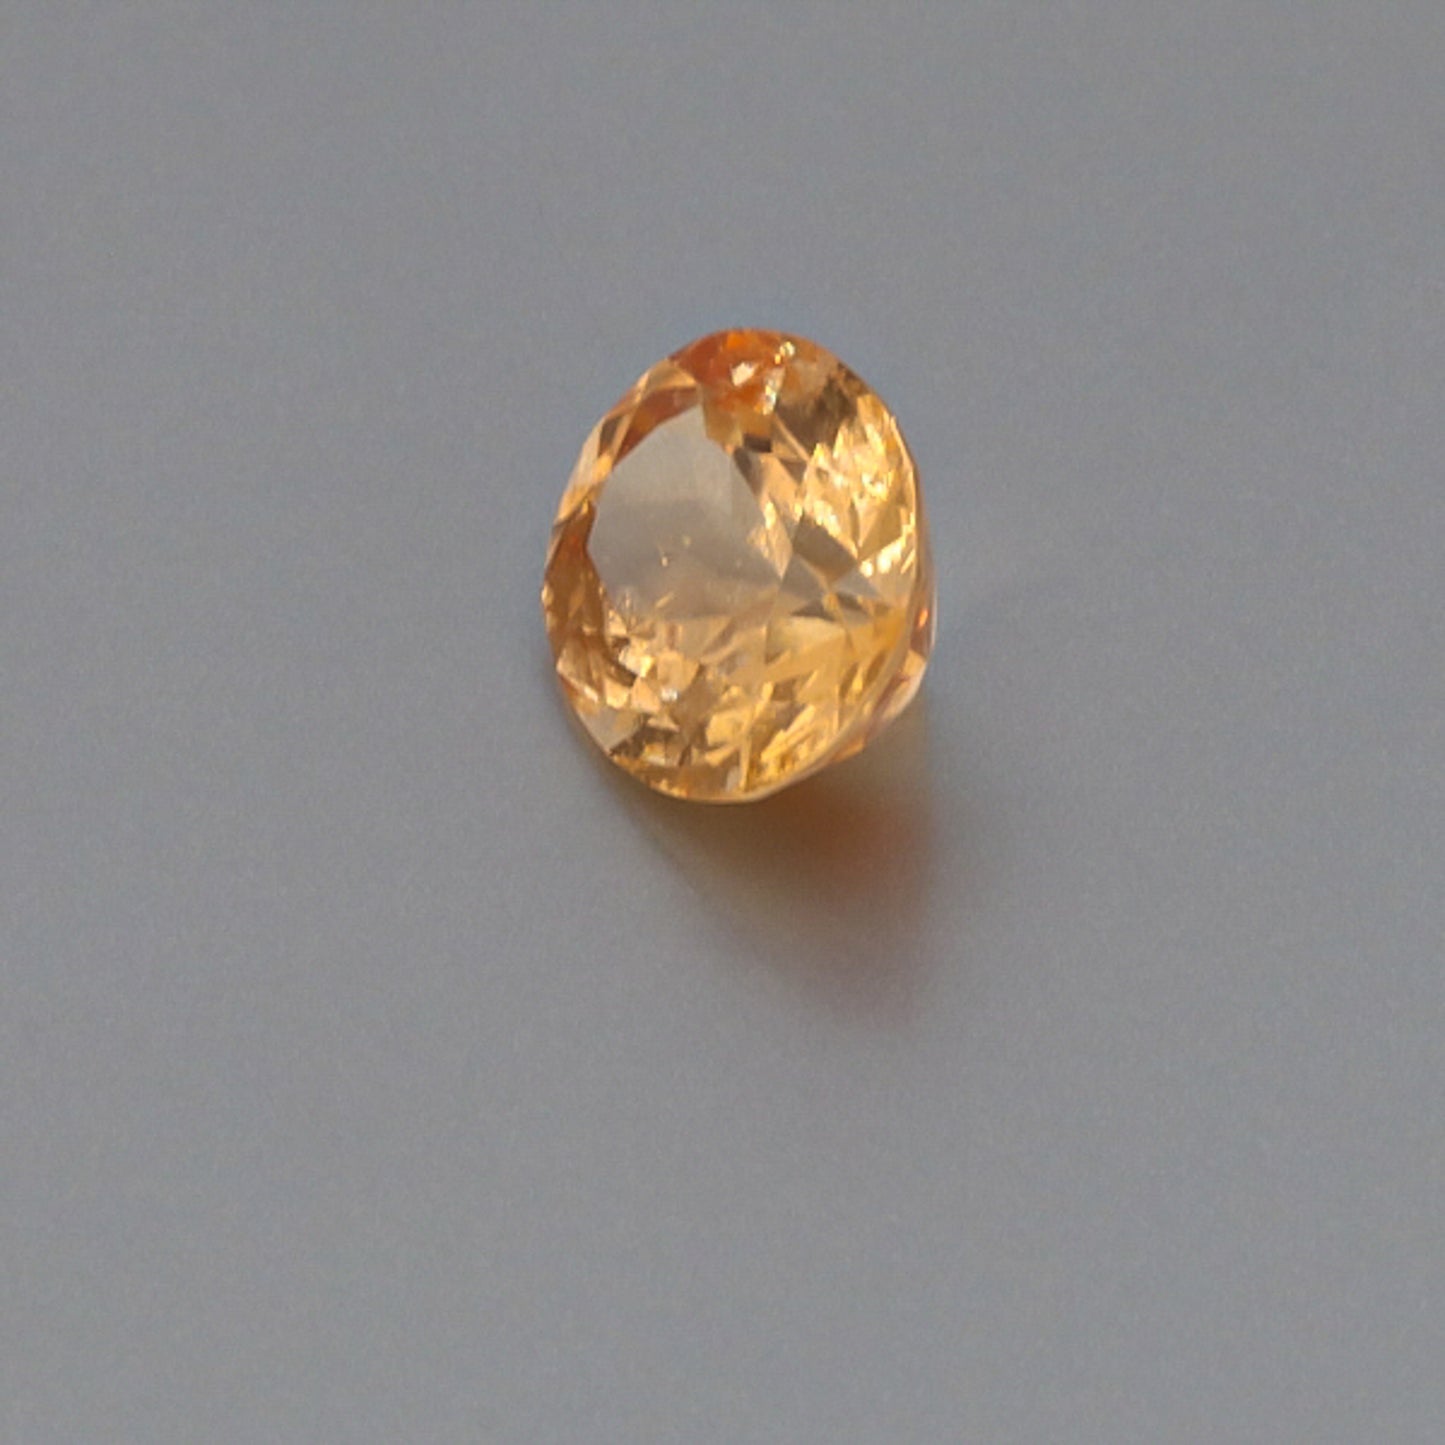 Load image into Gallery viewer, Natural Hessonite Garnet 4.76 Carats
